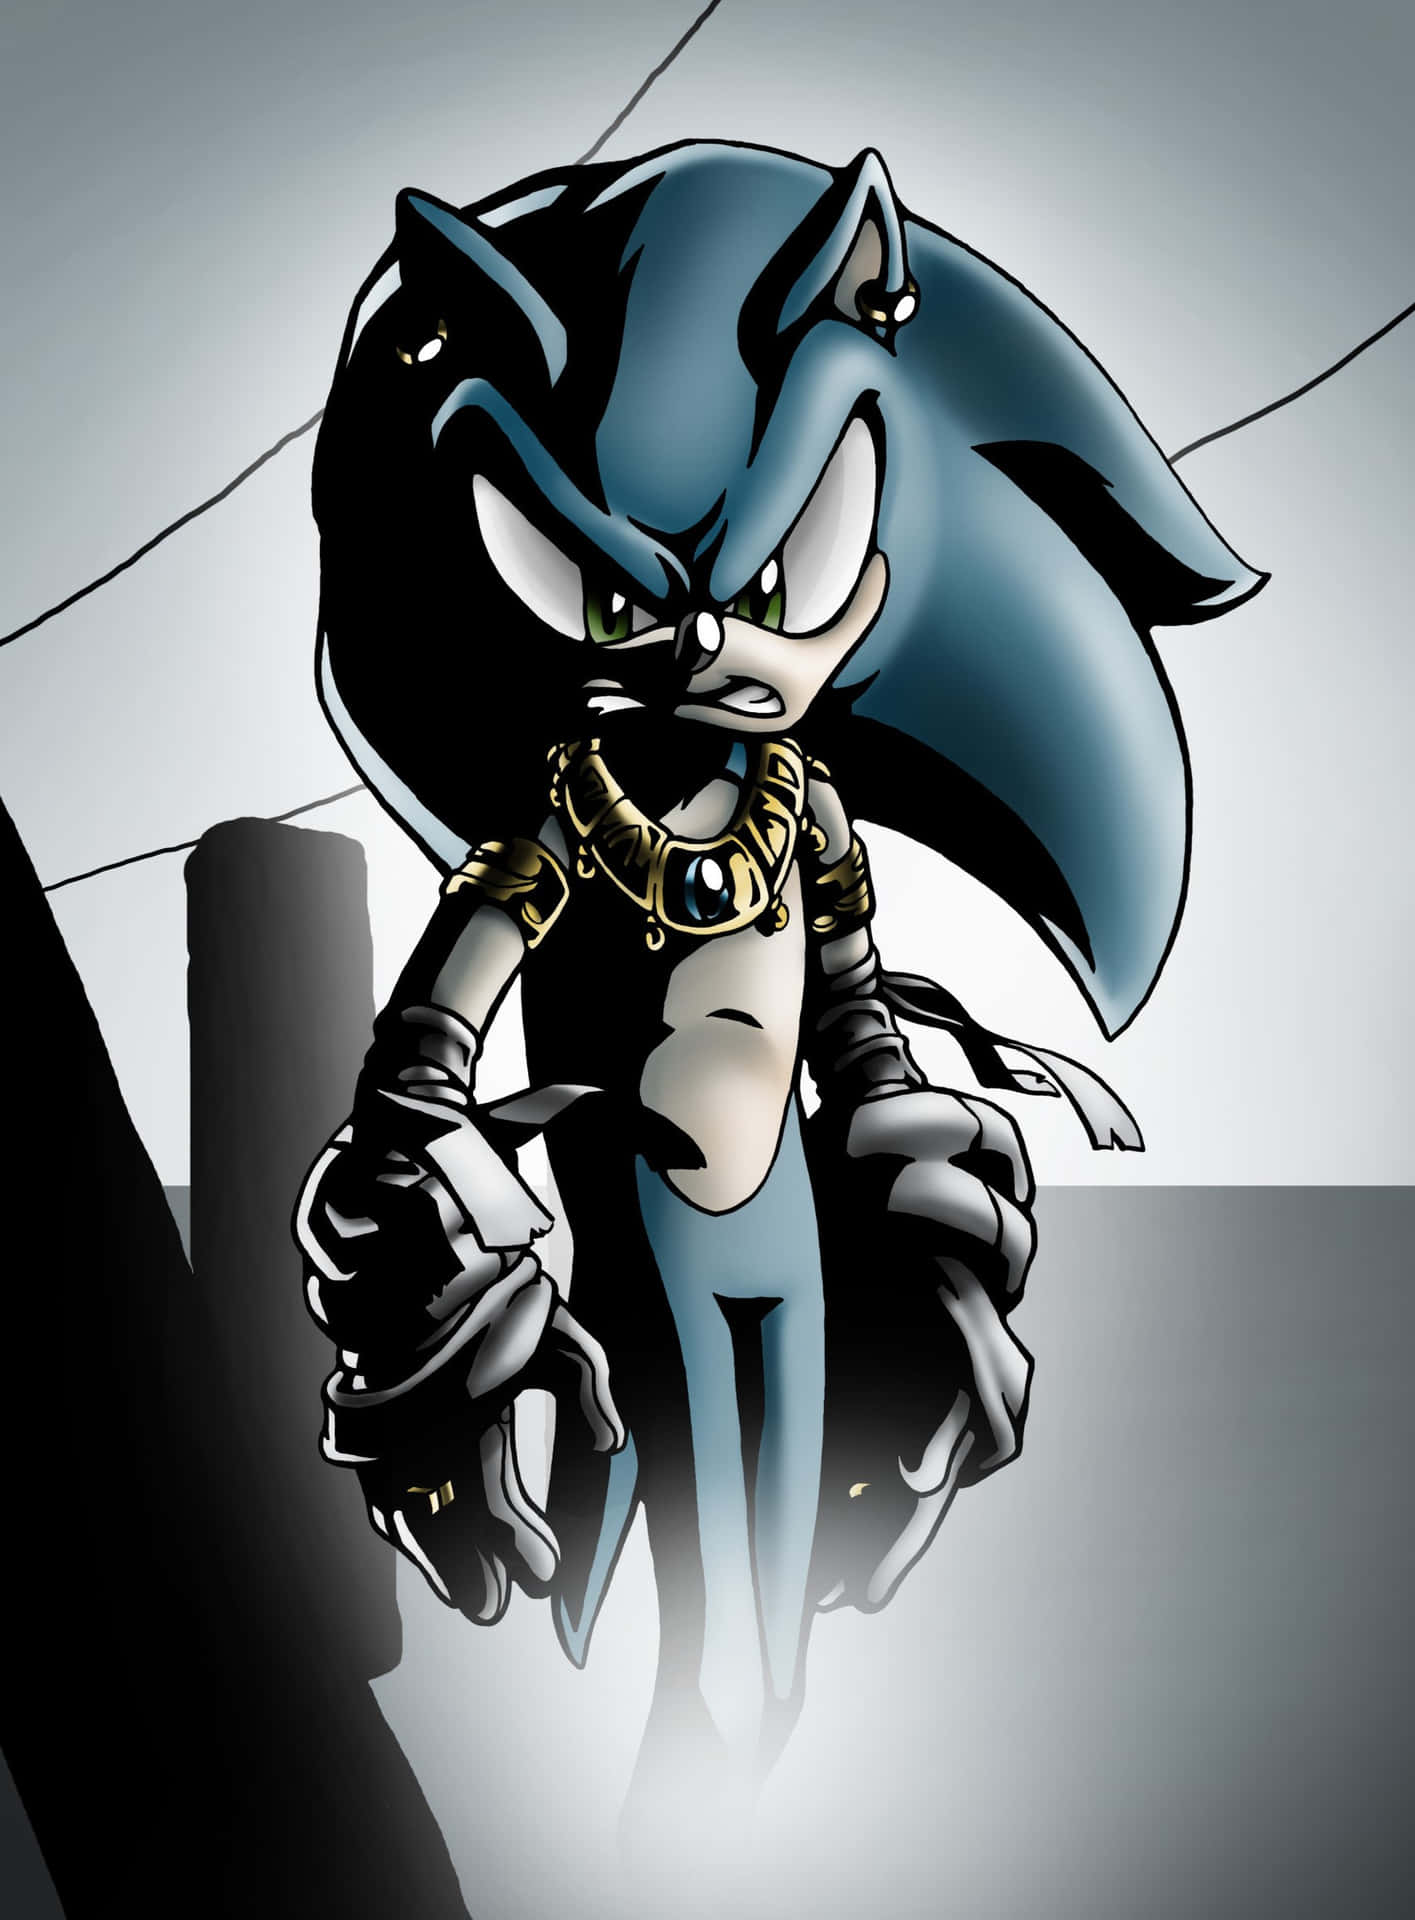 7 Sonic Characters From The Animated Series Who Need To Be In The Movies